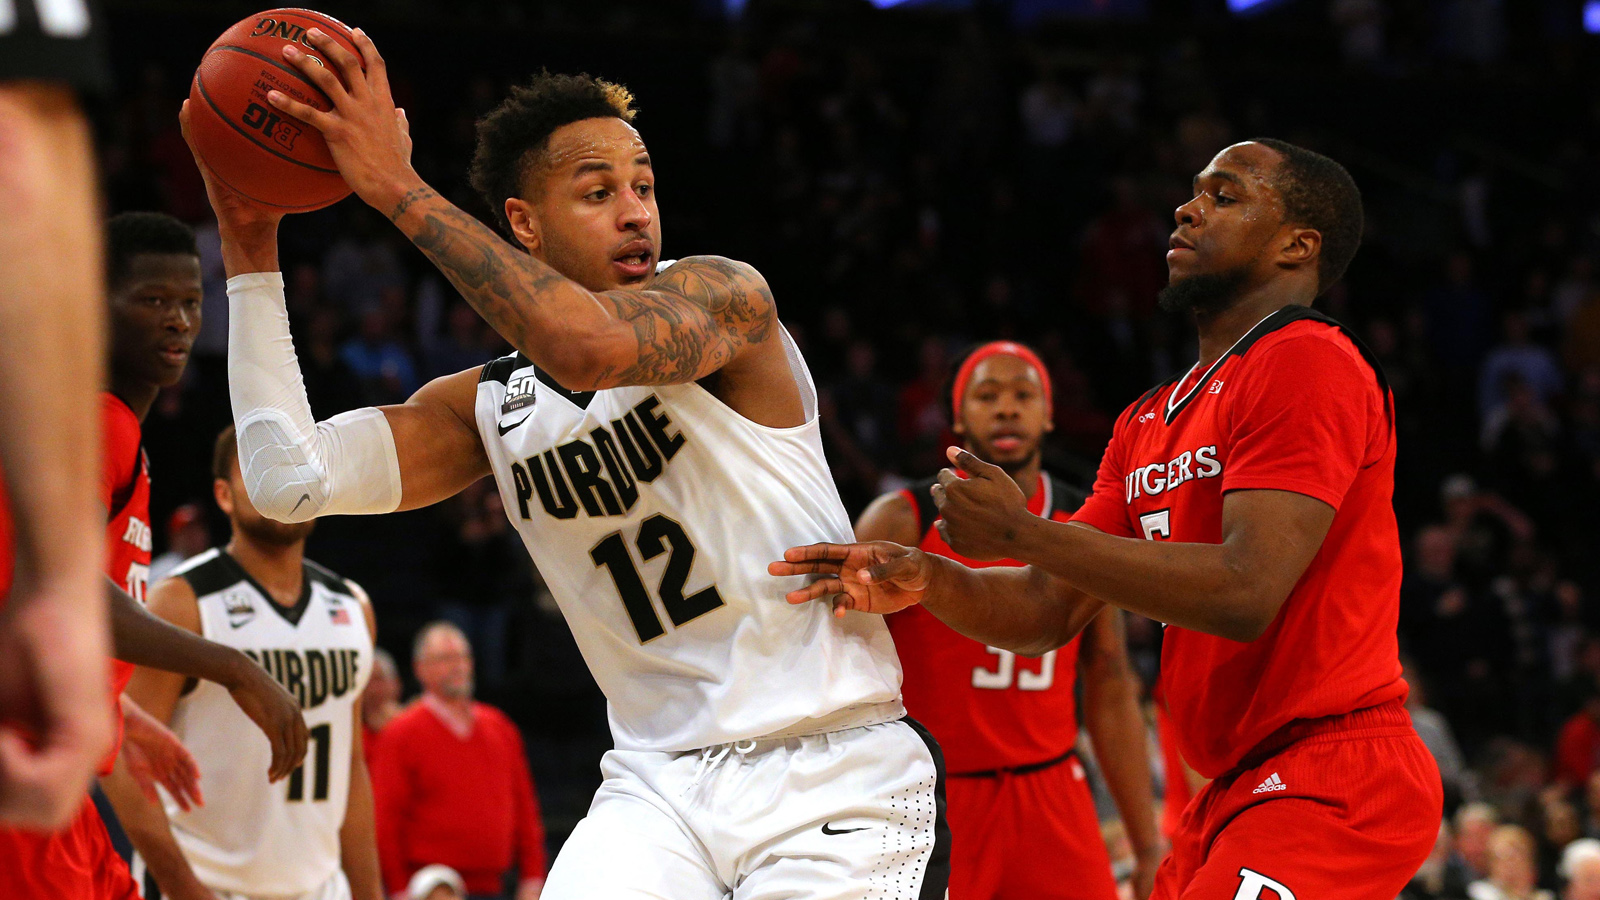 Vincent Edwards scores 26 in Purdue's 82-75 win over Rutgers